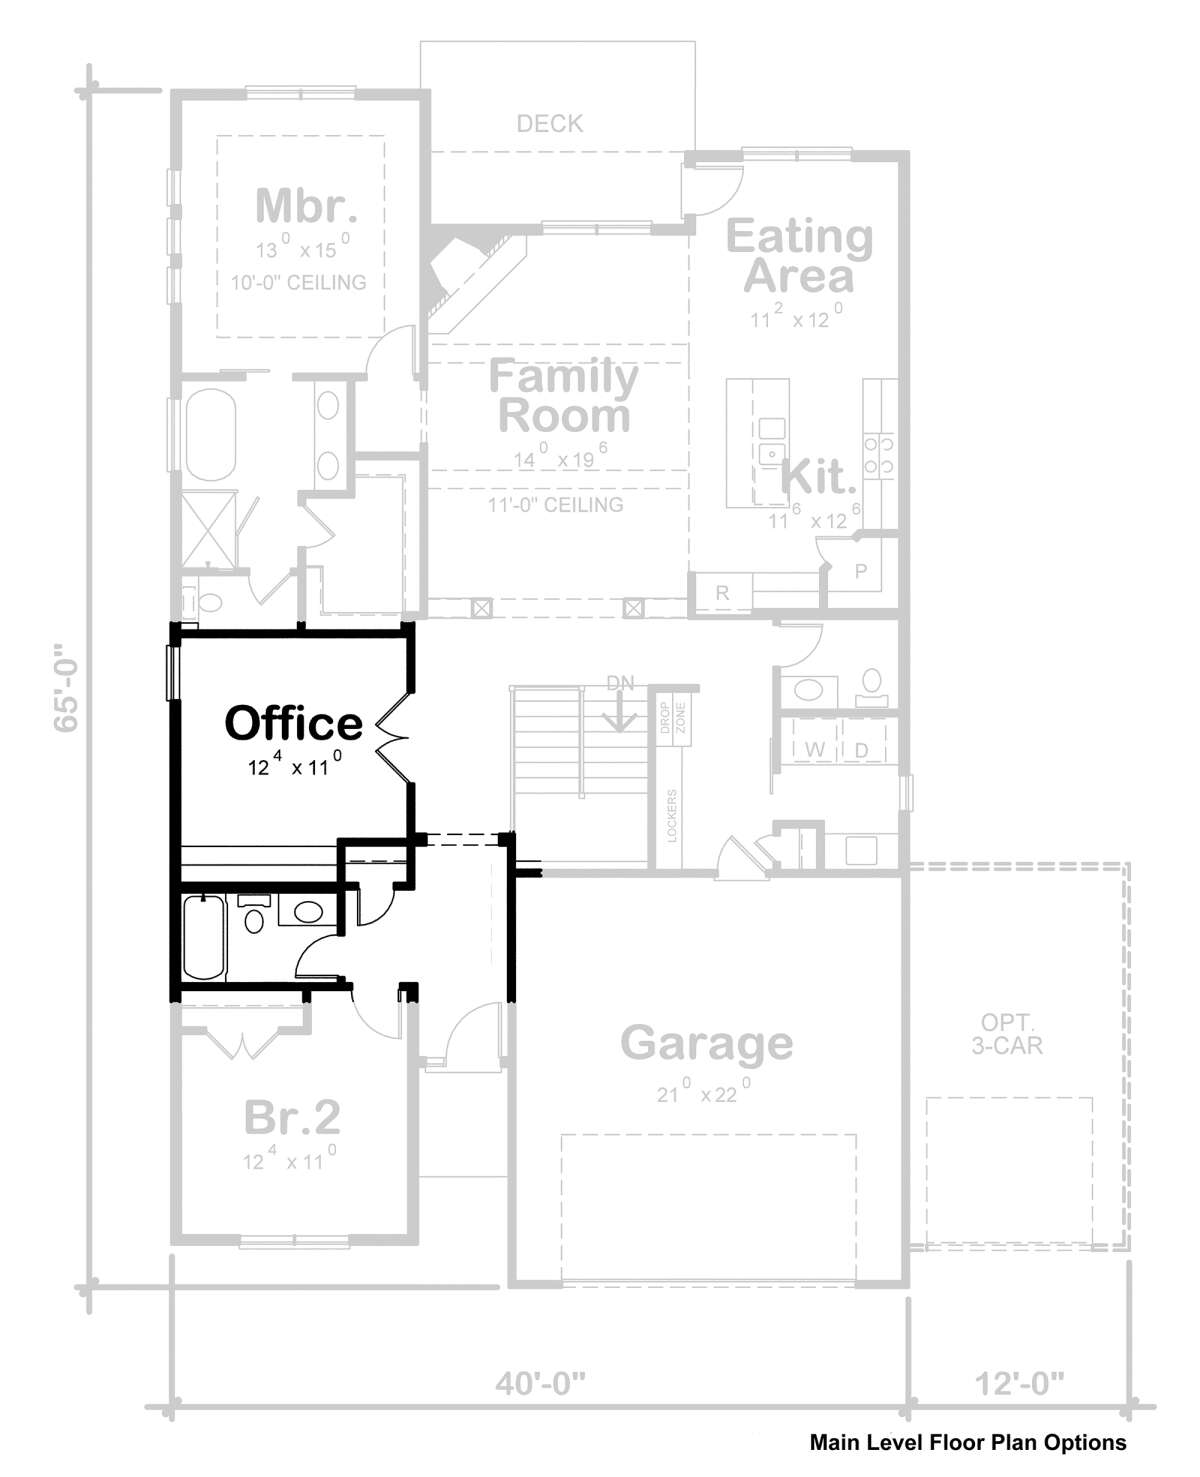 Optional Home Office for House Plan #402-01667